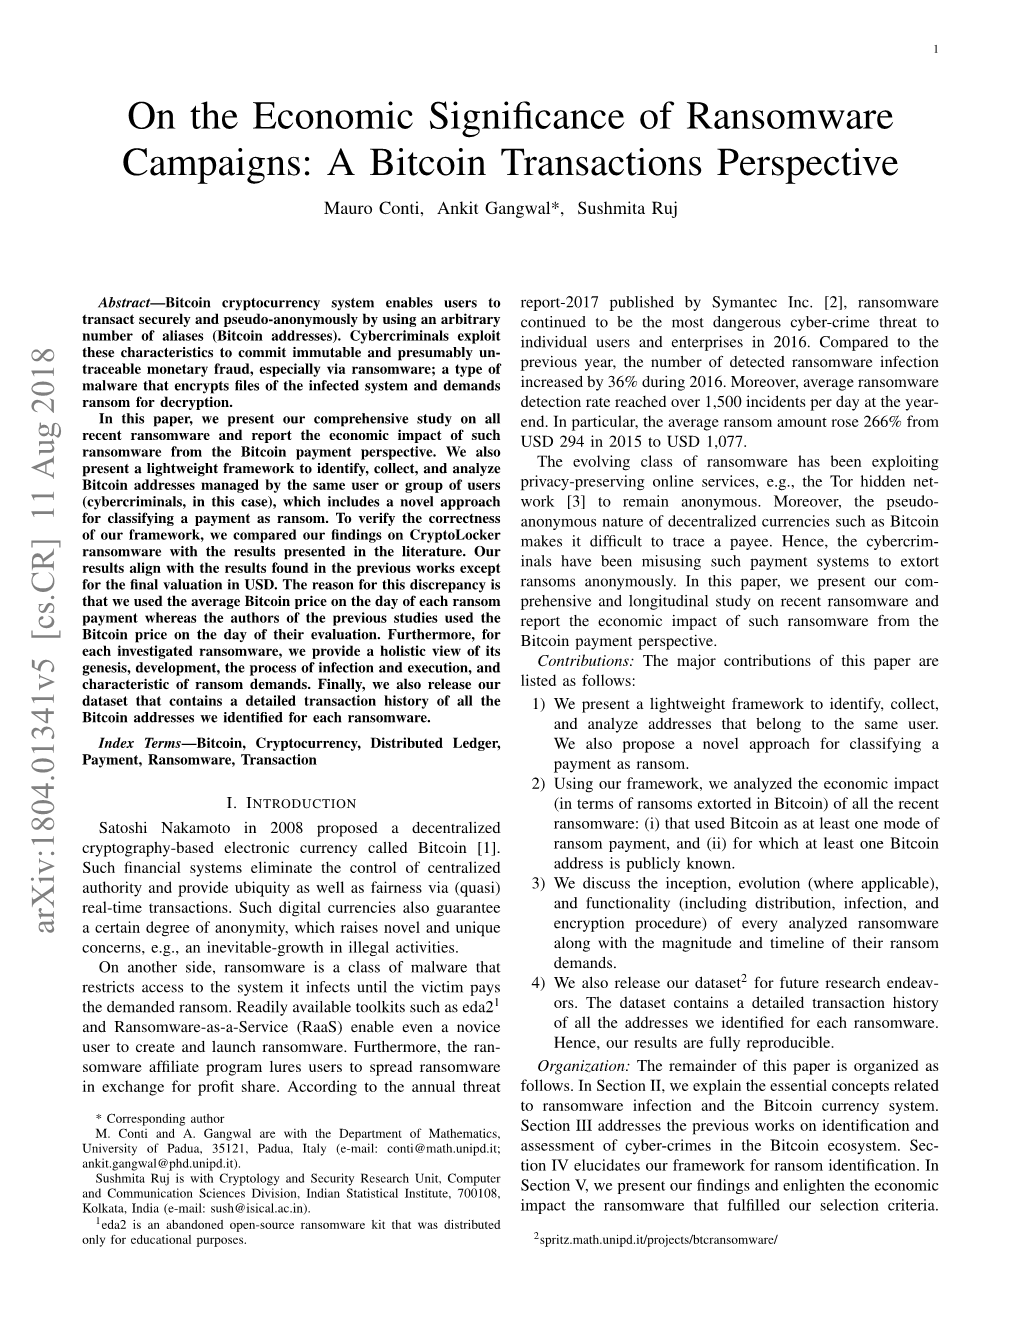 On the Economic Significance of Ransomware Campaigns: a Bitcoin